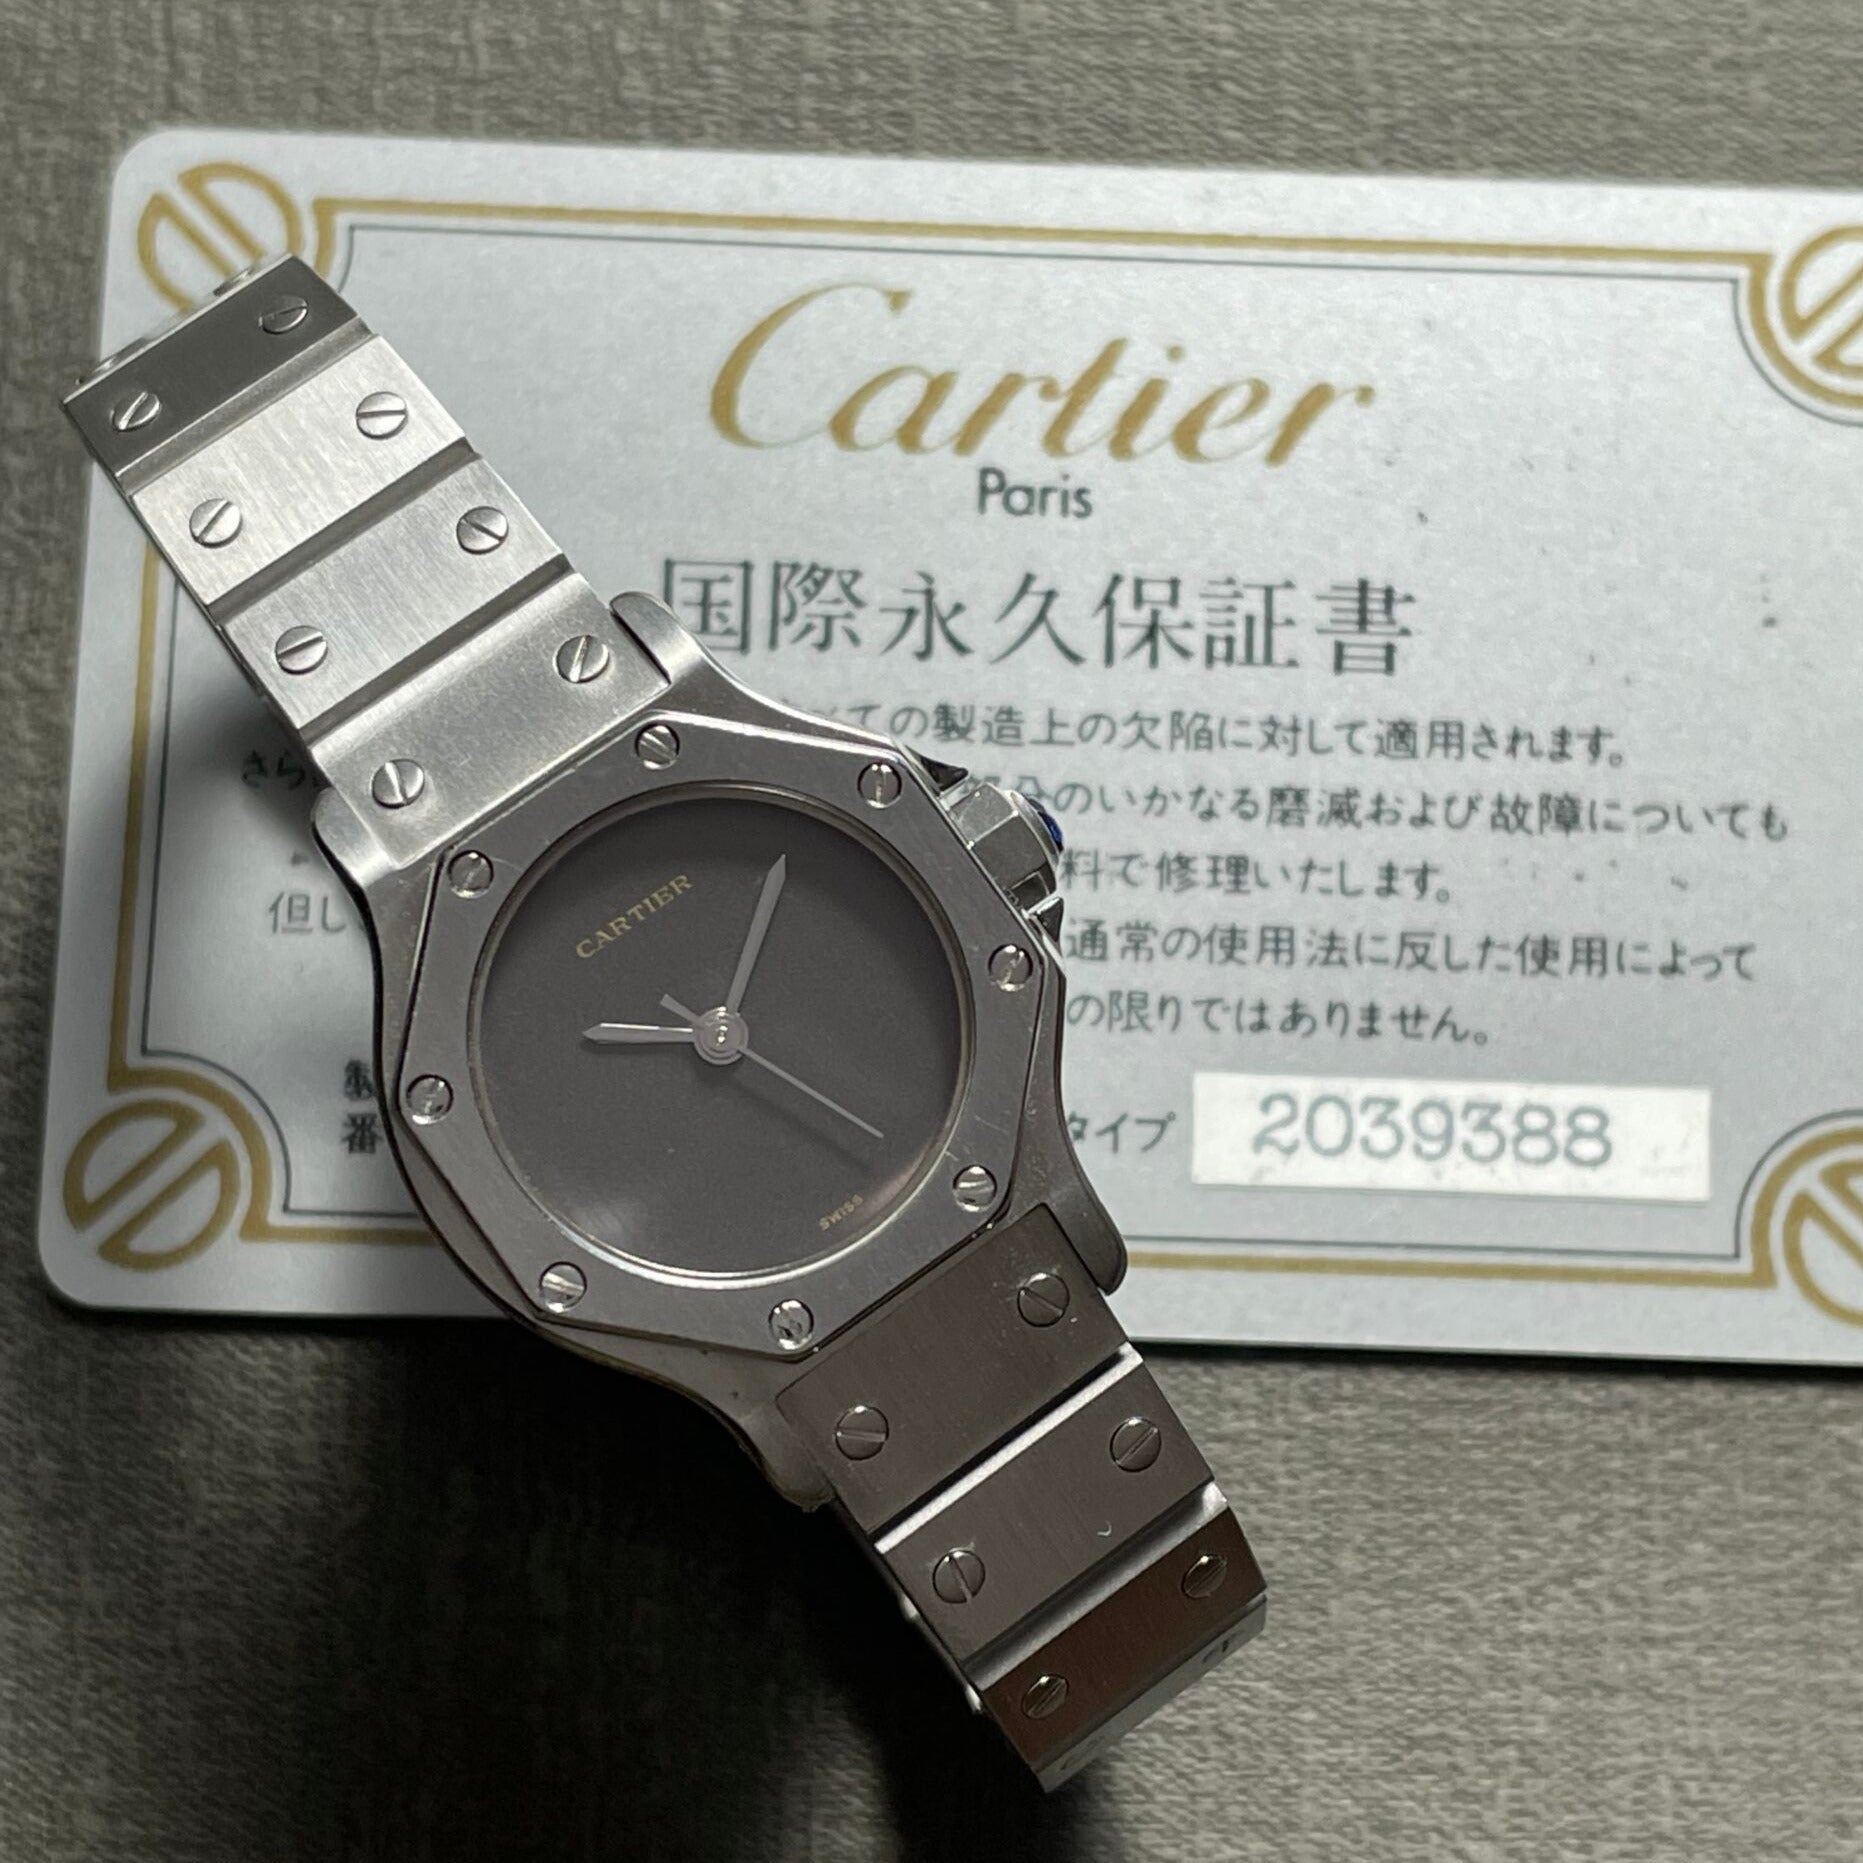 [Cartier] With Santos OKtagon SM Stainless steel GRAY Permanent warranty